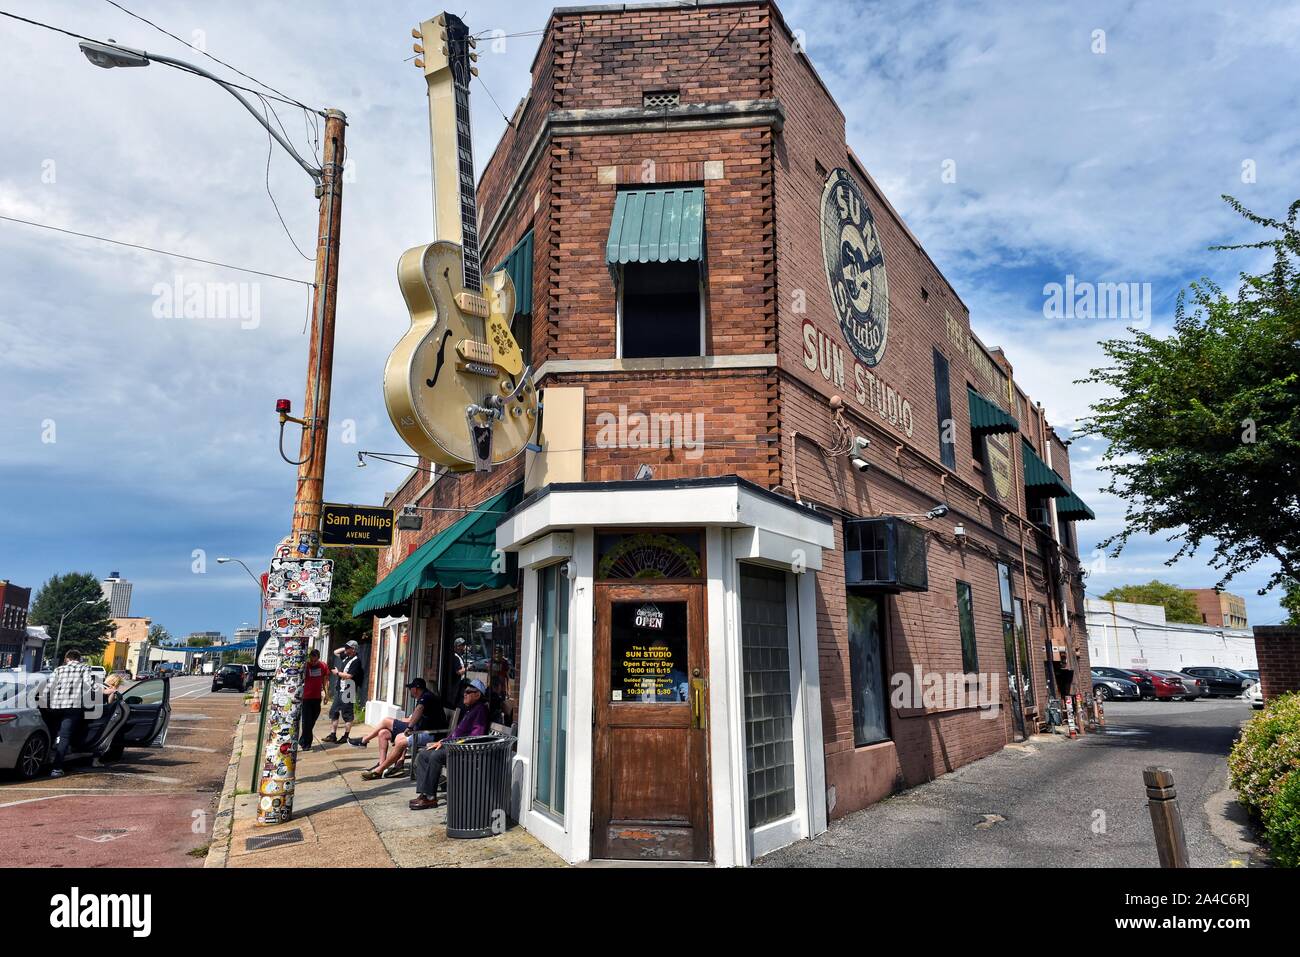 Memphis, TN, USA - September 24, 2019:  The legendary Sun Studio on Union Avenue has been called the birthplace of Rock and Roll. Owner Sam Phillips r Stock Photo